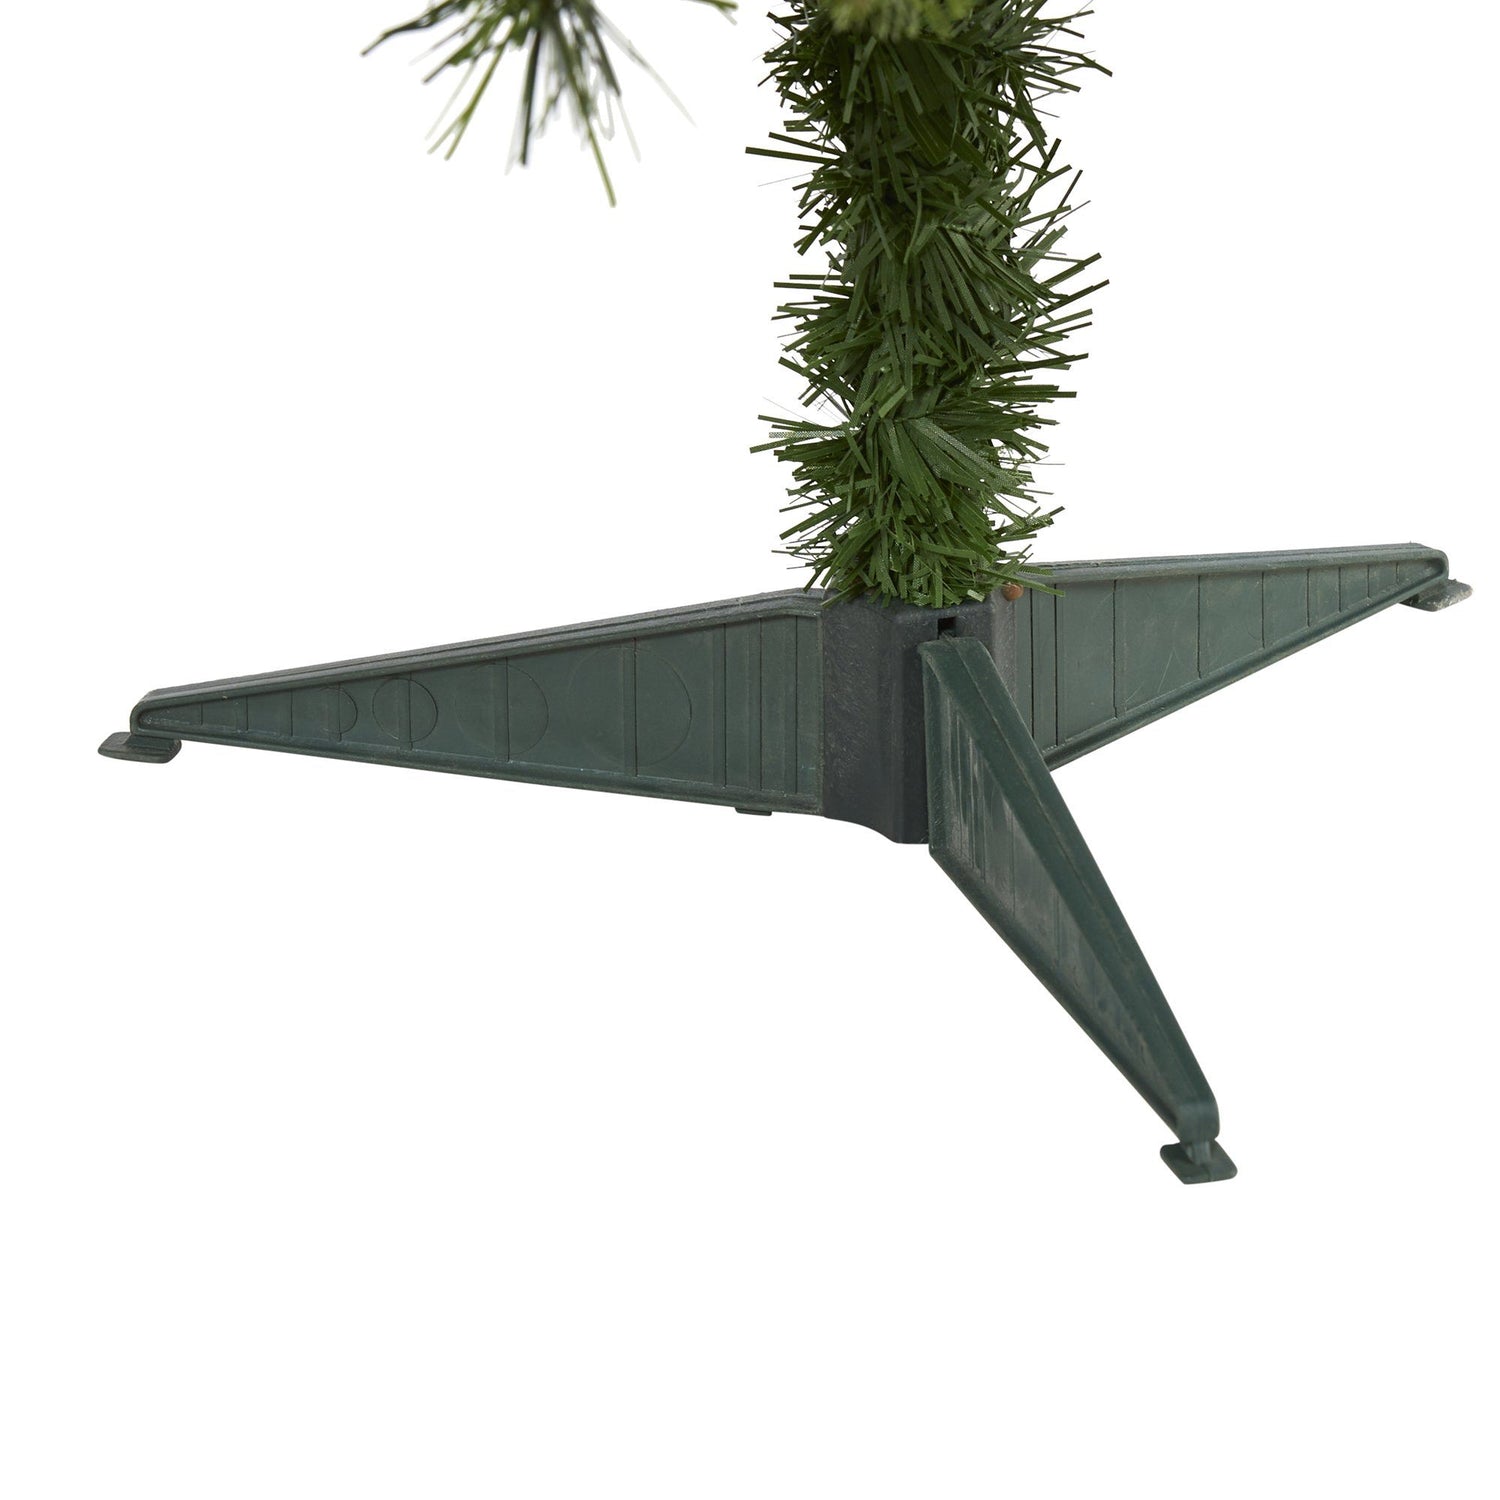 3’ Wyoming Mixed Pine Artificial Christmas Tree with 150 Clear Lights and 270 Bendable Branches